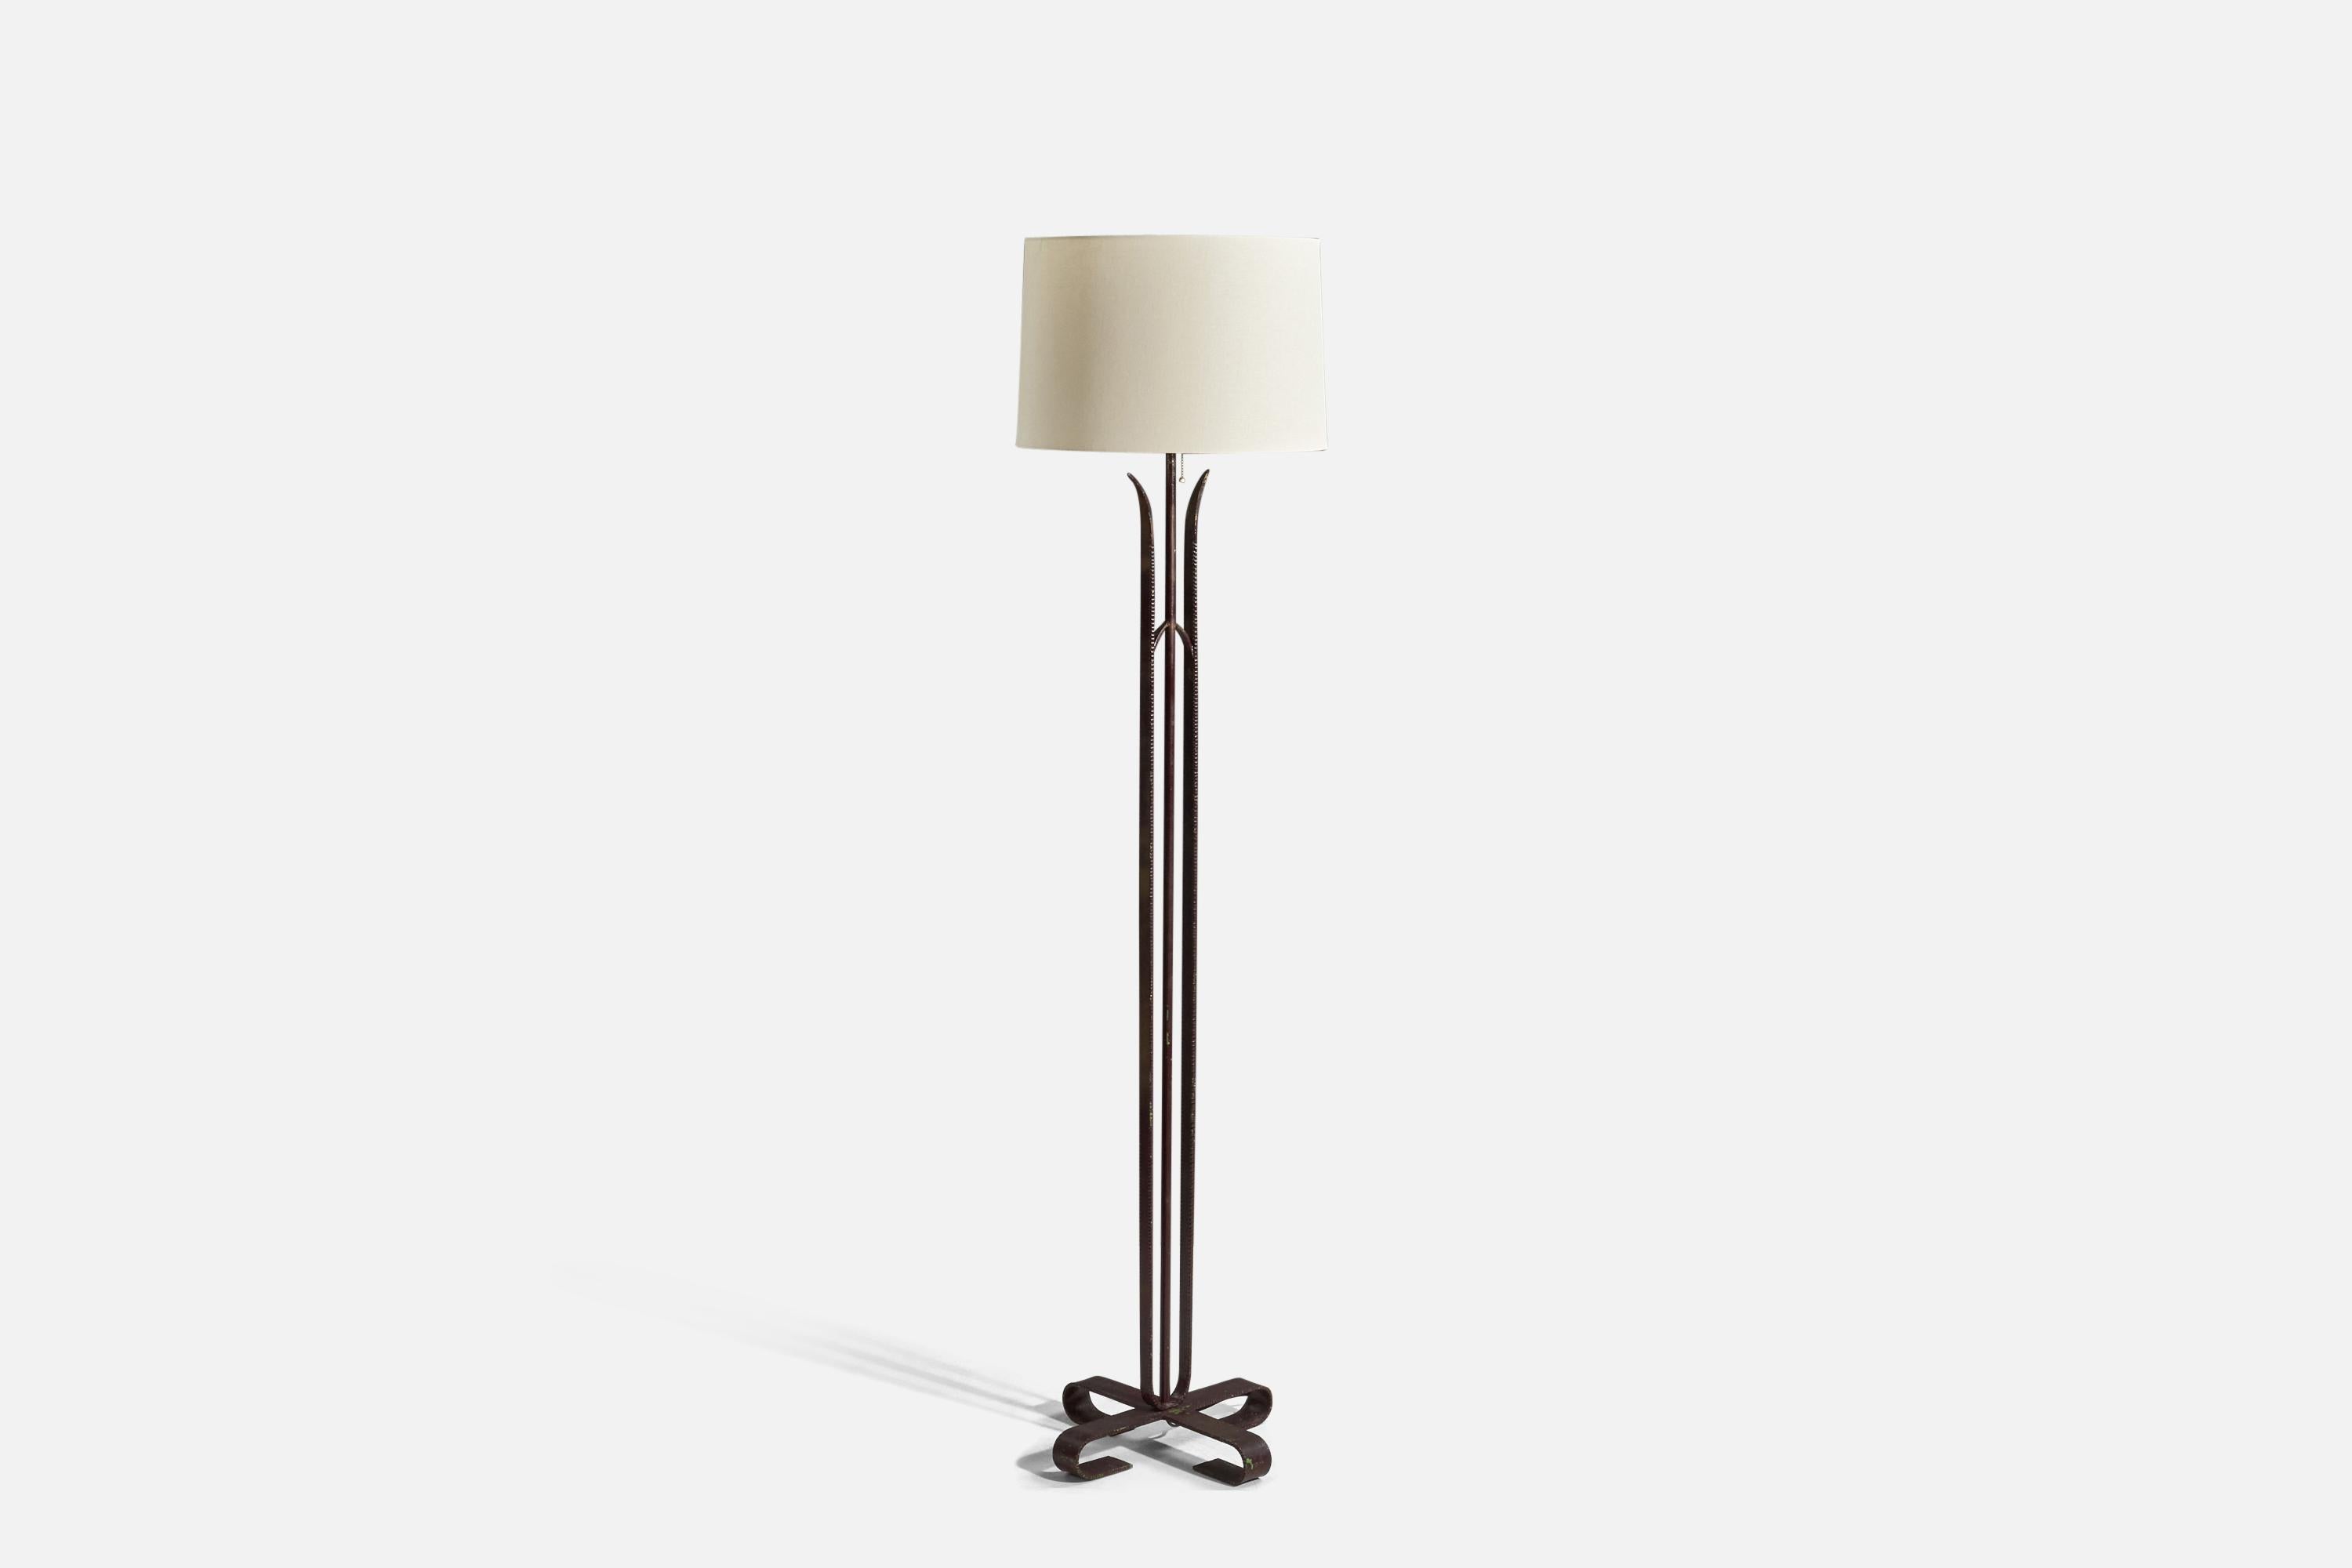 A black-lacquered iron and fabric floor lamp designed and produced in Italy, 1940s.

Sold with Lampshade(s). 
Stated dimensions refer to the Floor Lamp with the Shade(s). 

Socket takes standard E-26 medium base bulb.
There is no maximum